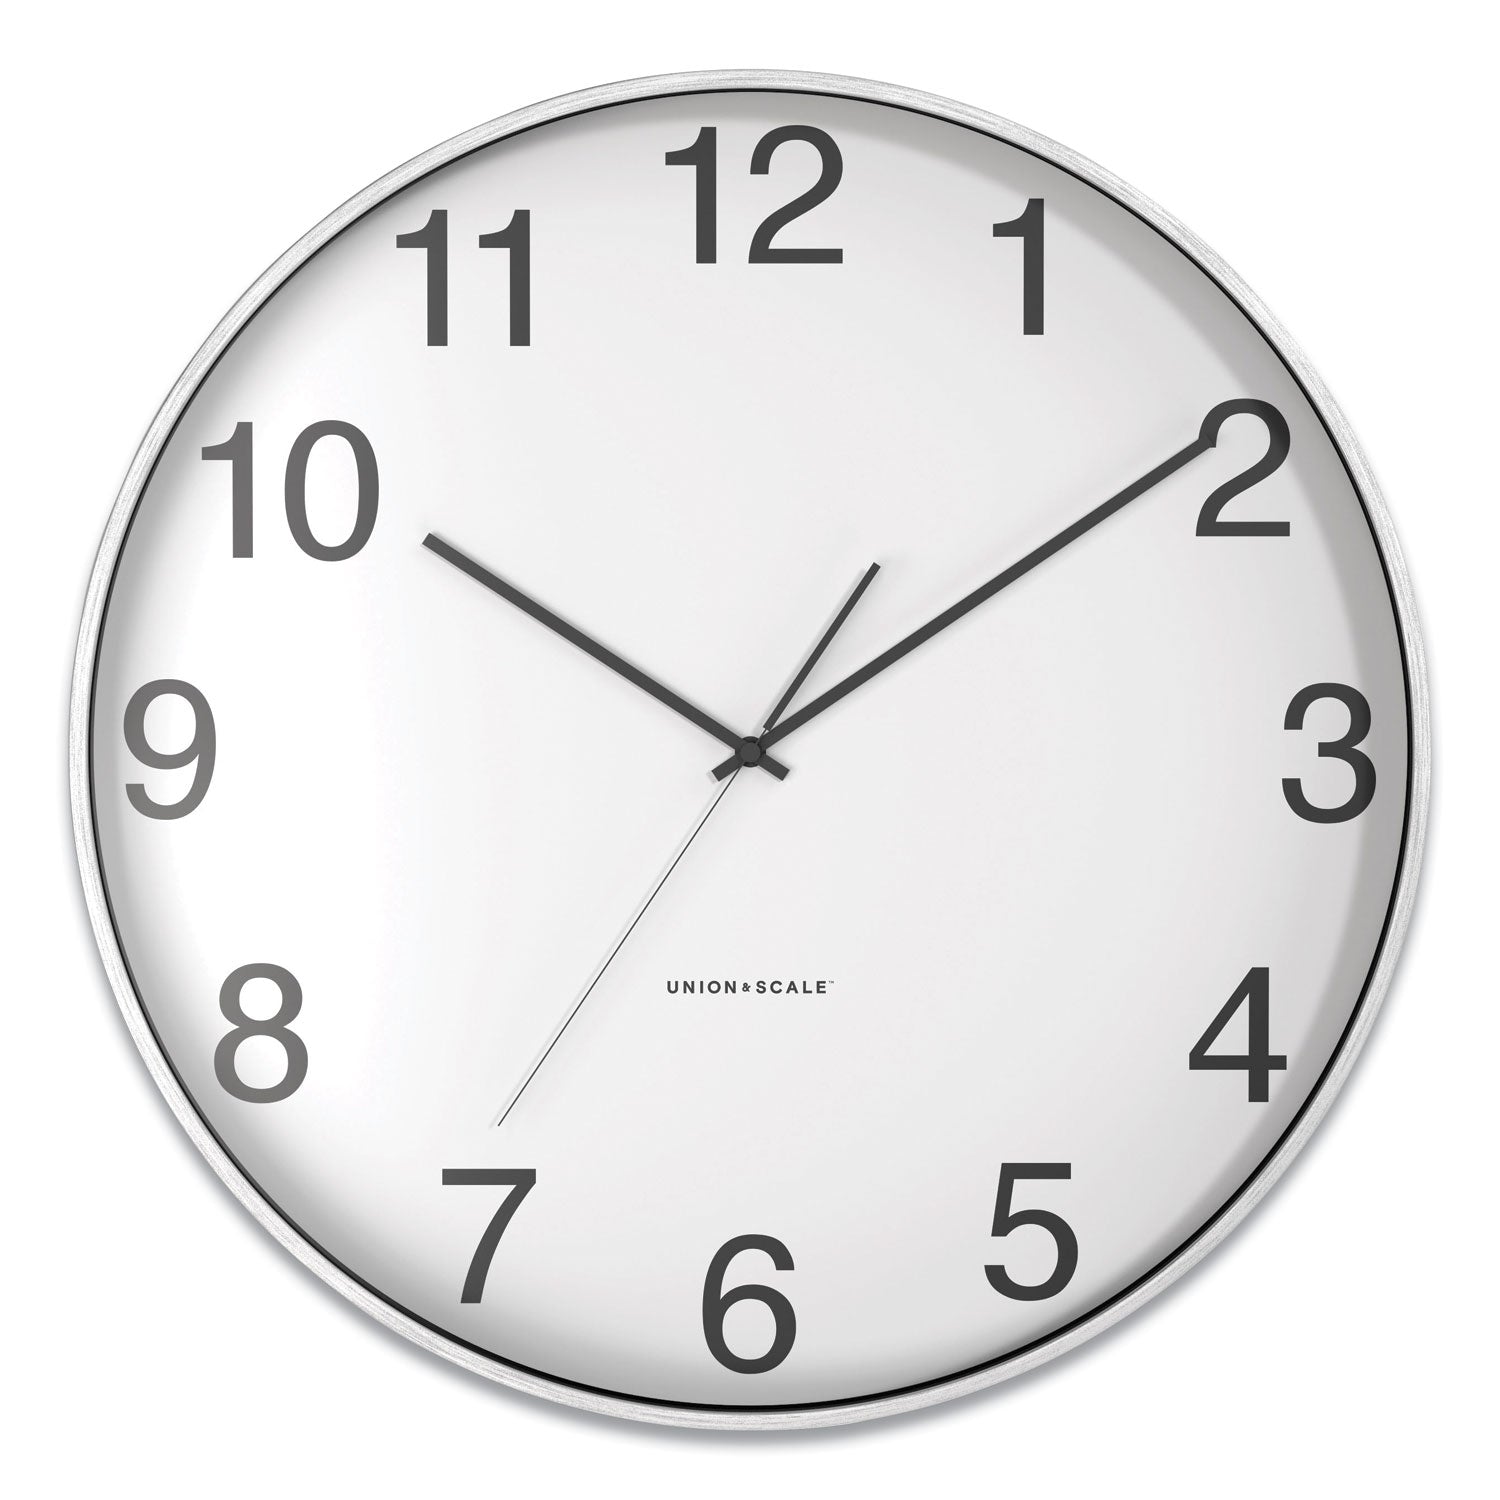 essentials-classic-round-wall-clock-12-overall-diameter-silver-case-1-aa-sold-separately_uos24411457 - 1